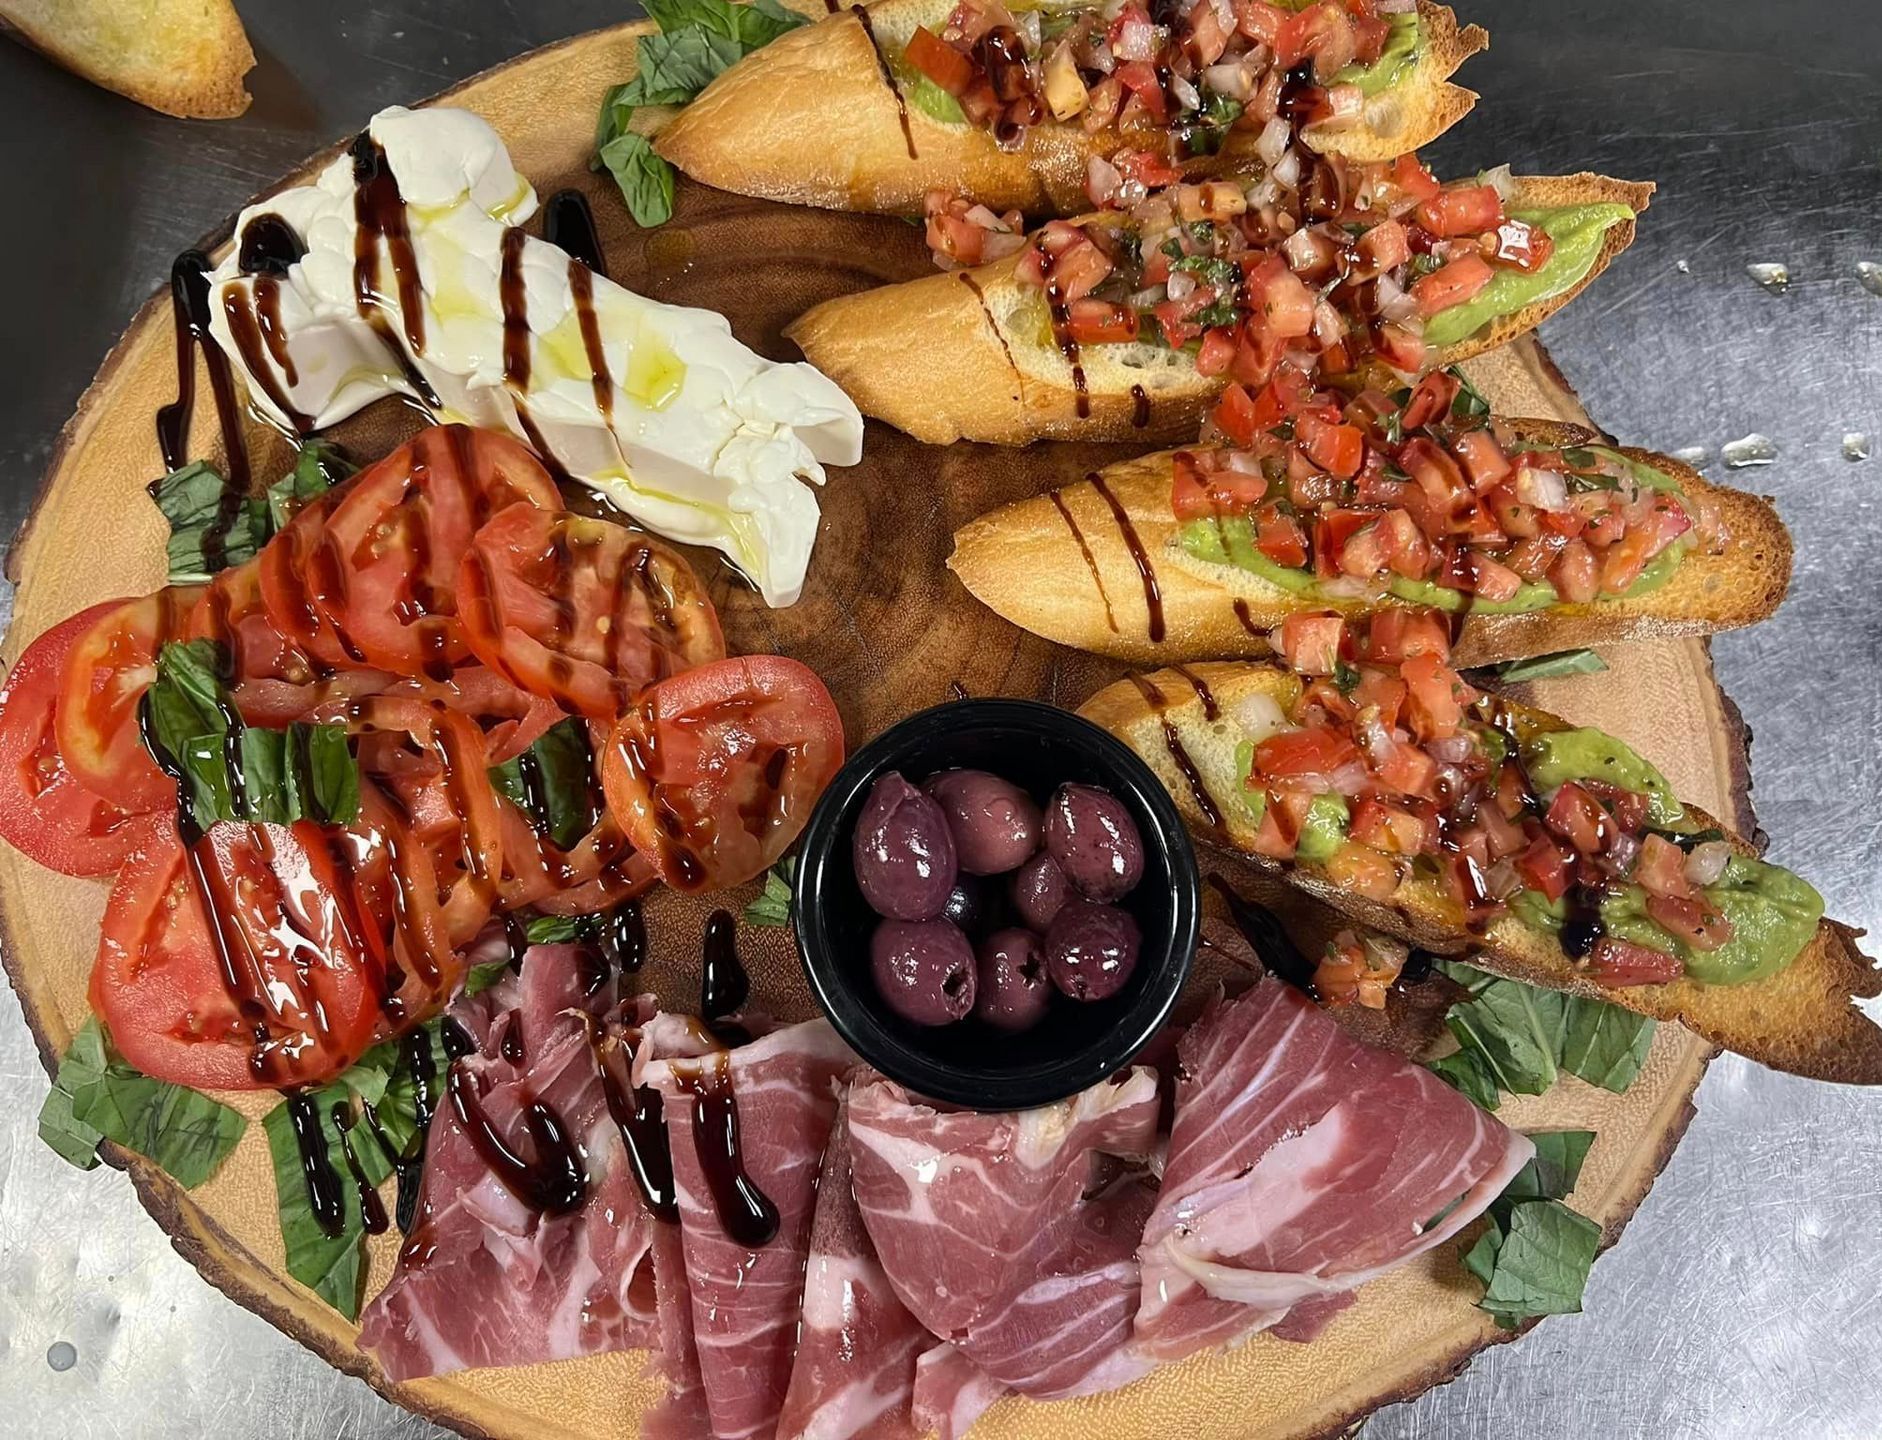 A wooden cutting board topped with a variety of food.